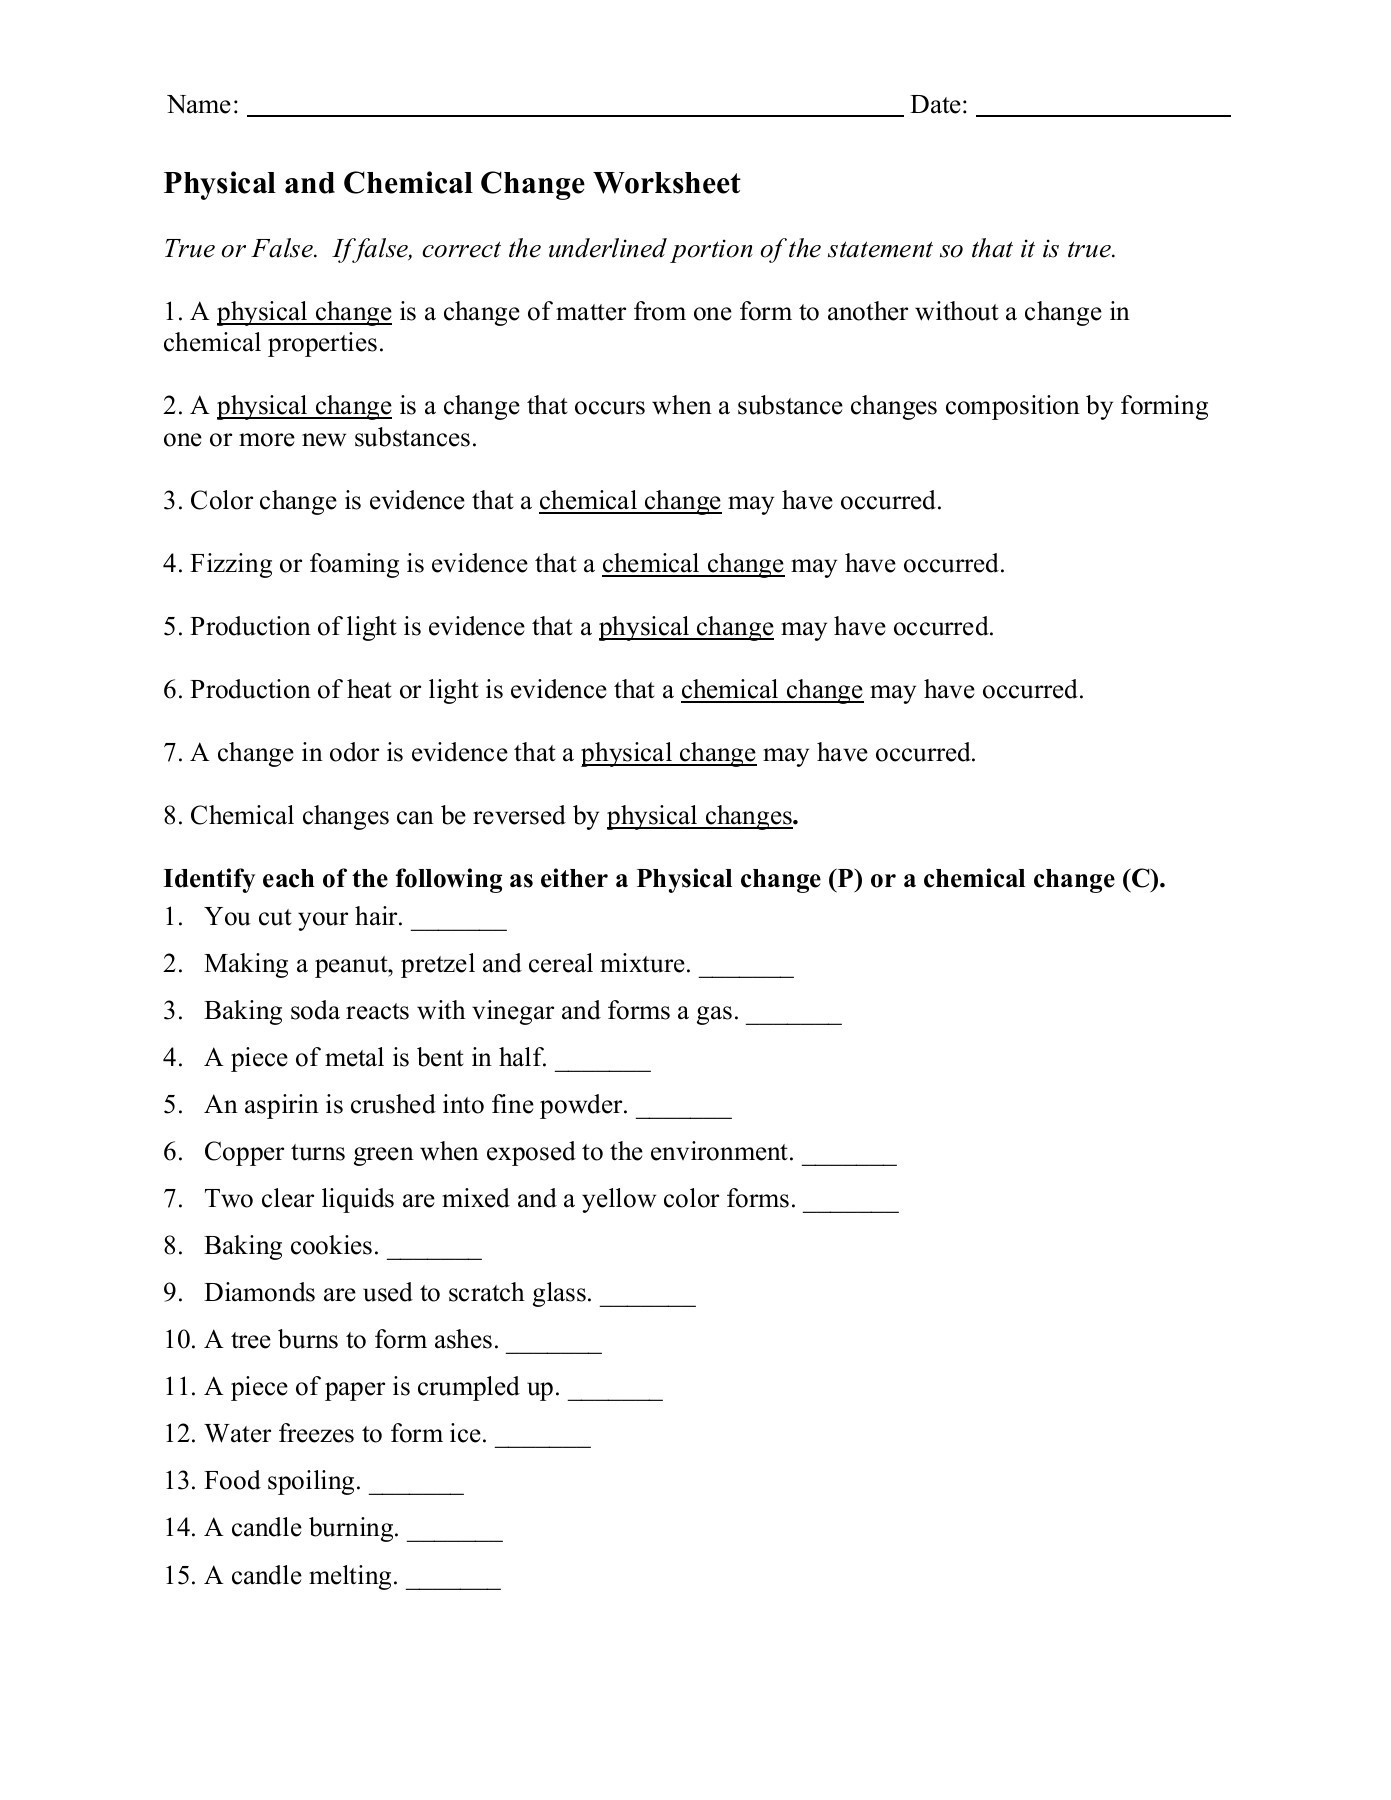 Physical Vs Chemical Changes Worksheet Physical and Chemical Change Worksheet